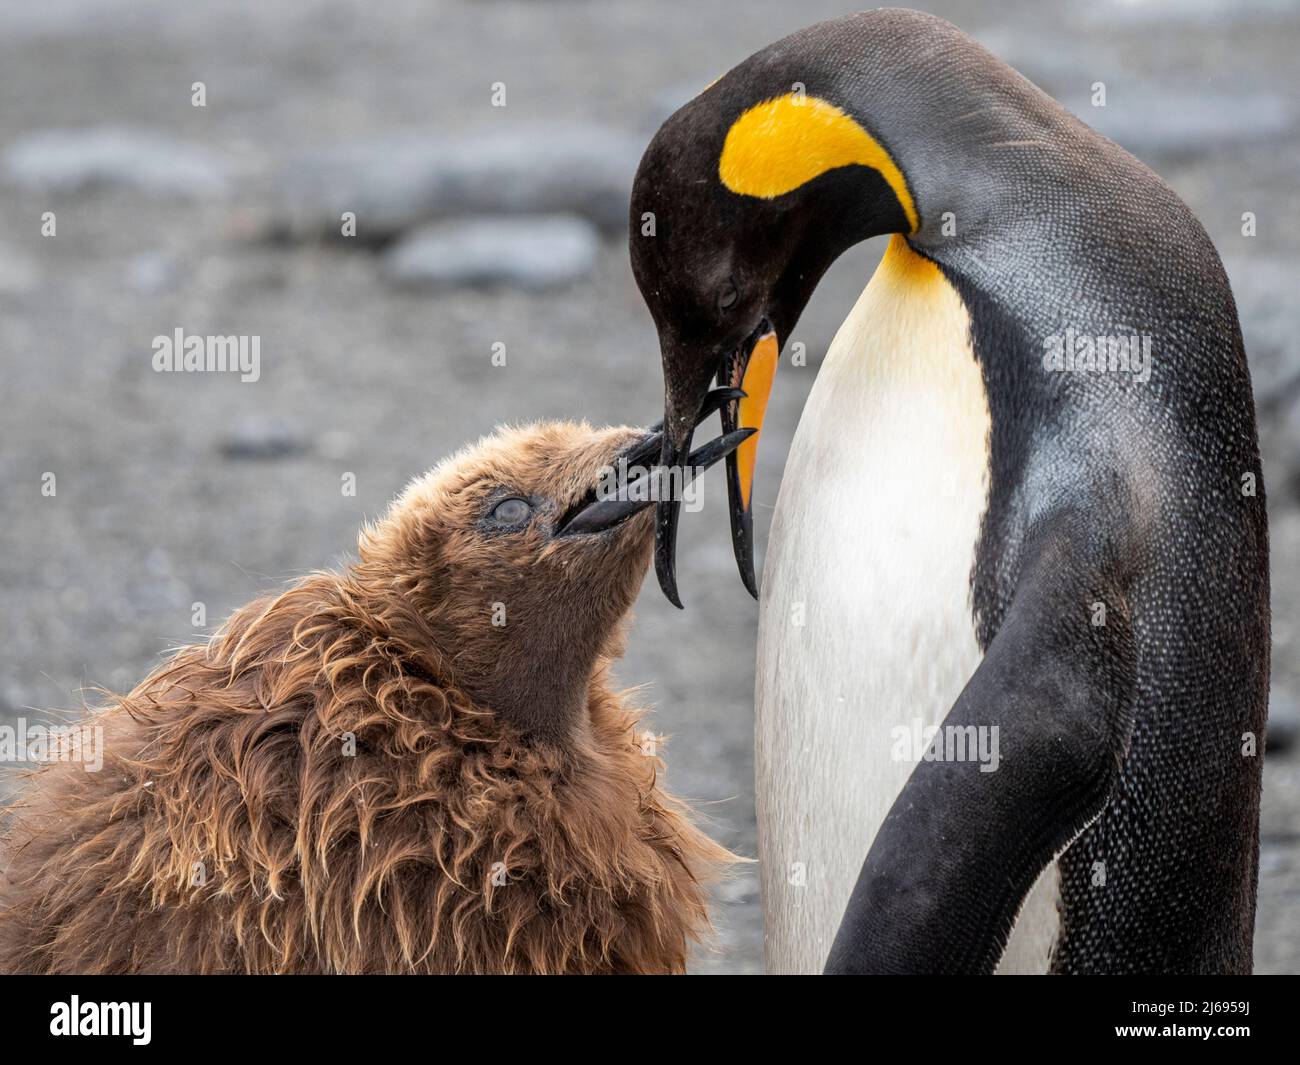 King penguin (Aptenodytes patagonicus), adult feeding a chick at breeding colony in Gold Harbour, South Georgia, South Atlantic, Polar Regions Stock Photo